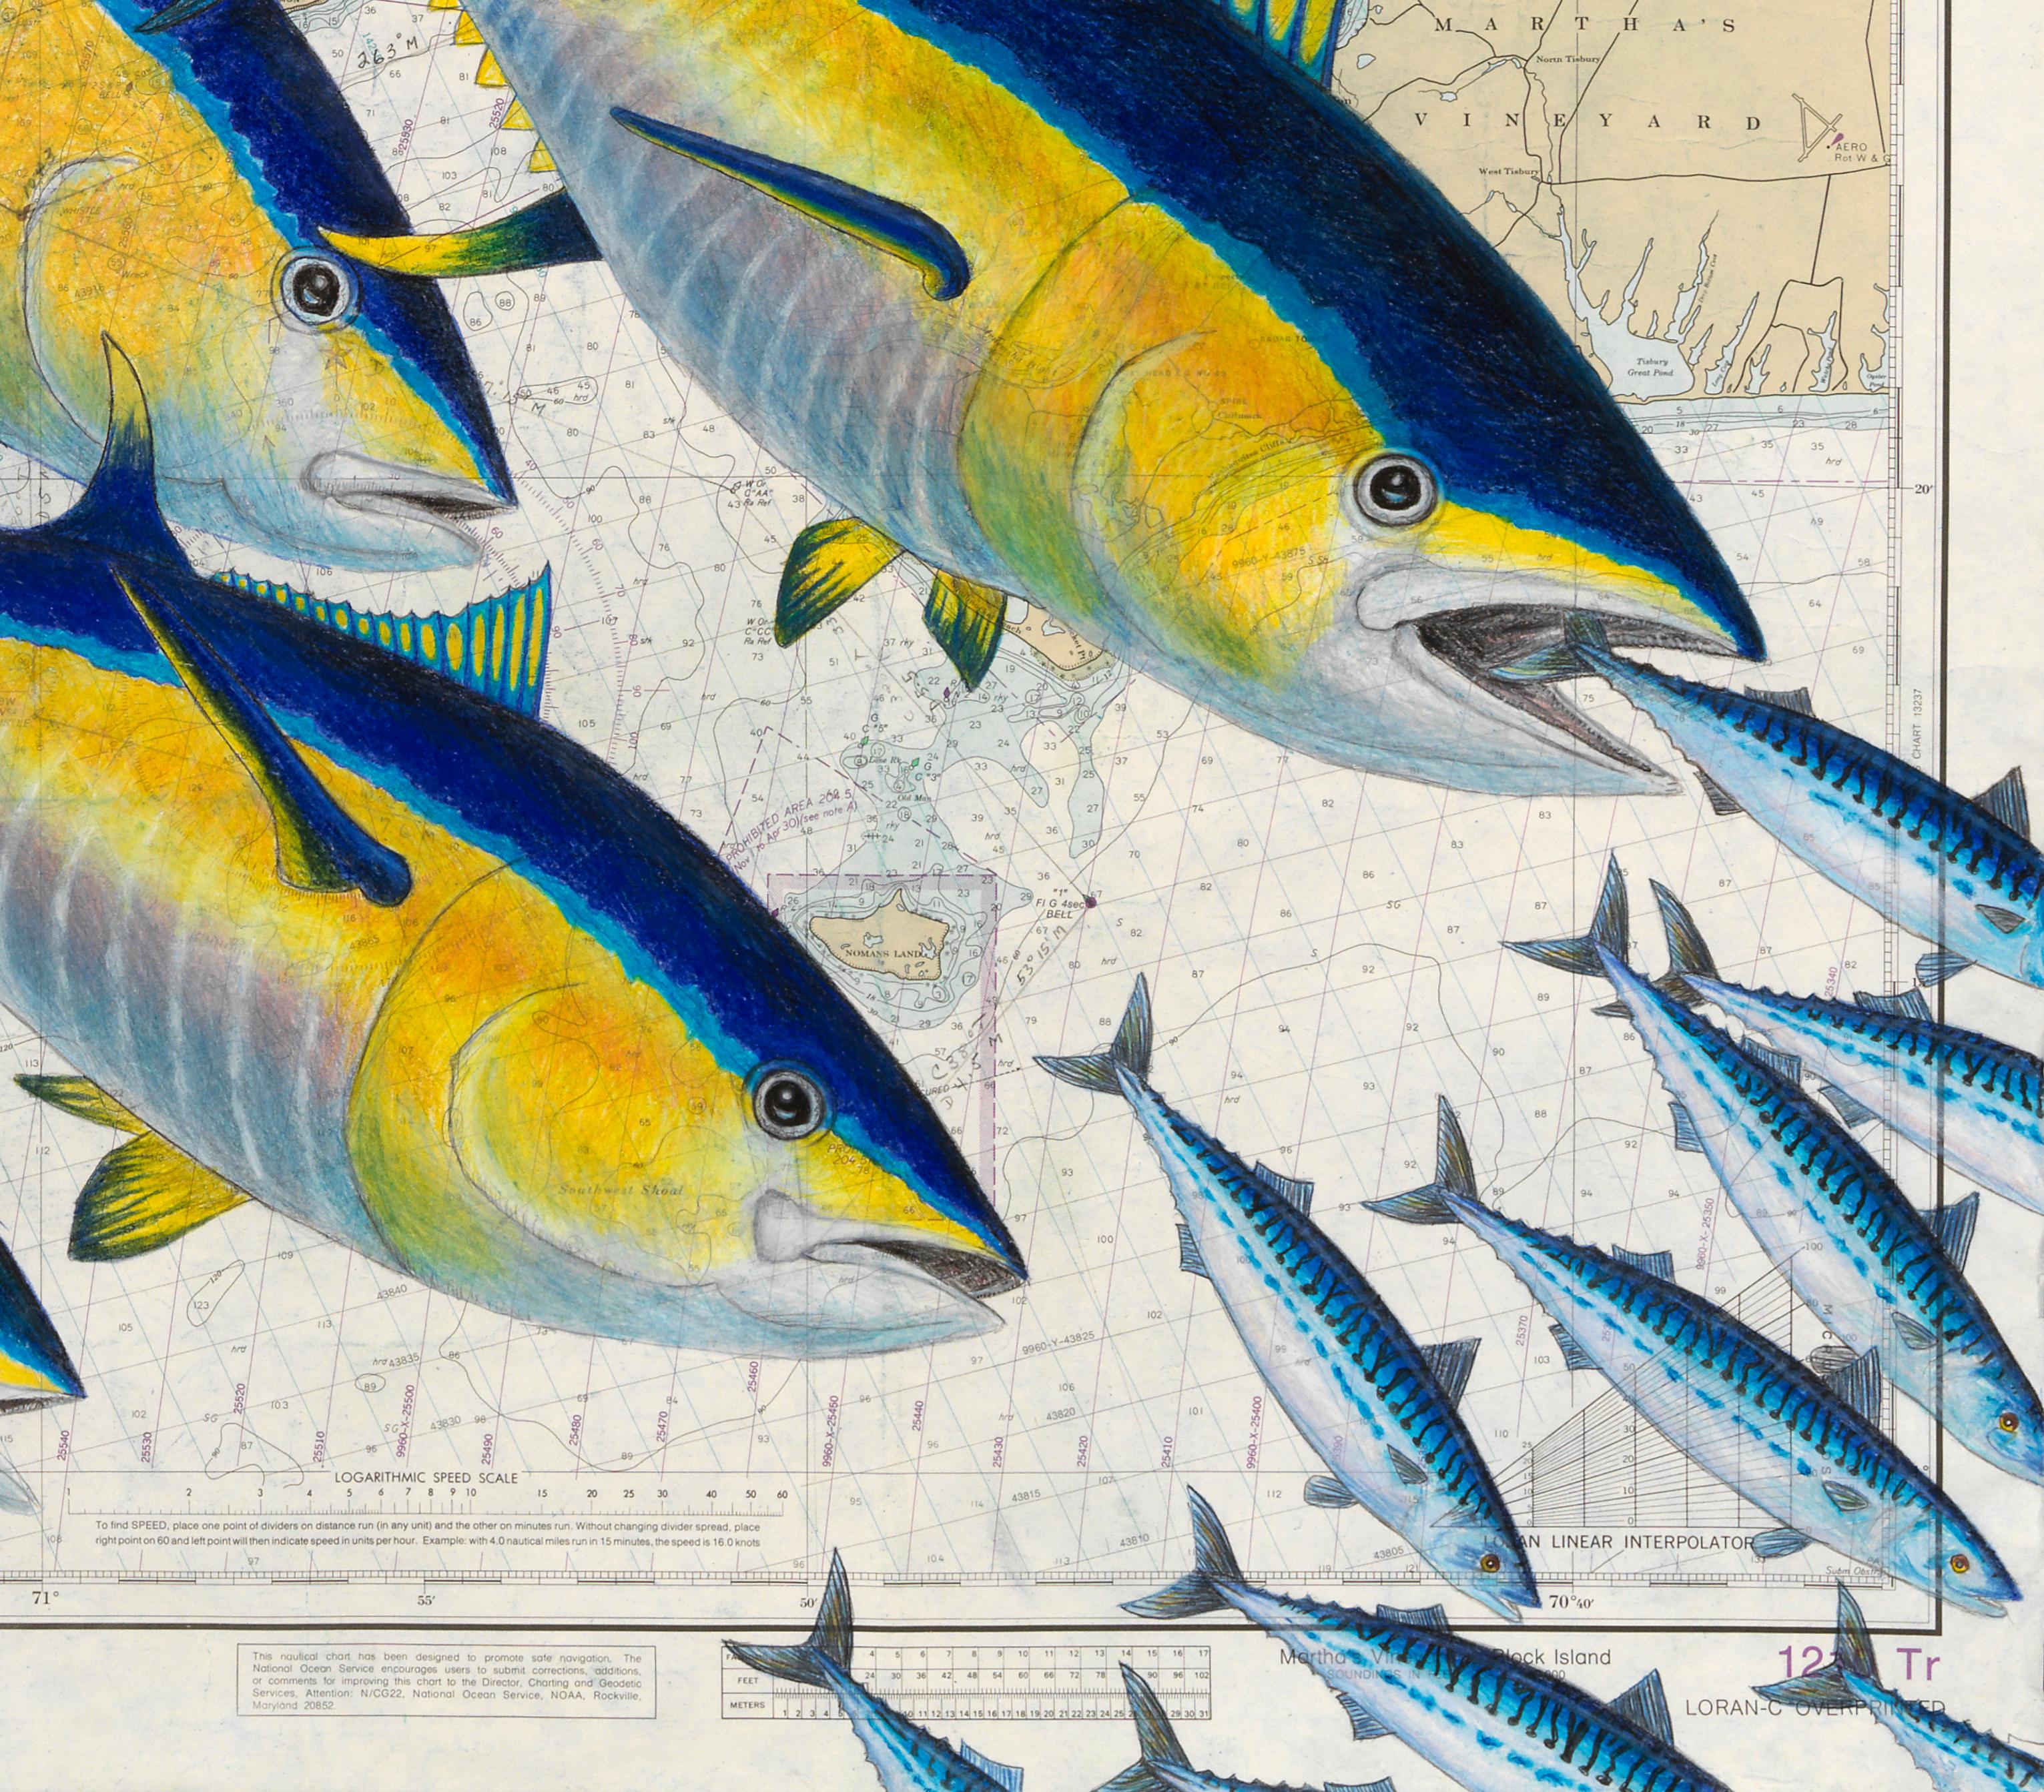 A school of tuna swim across the water trying to catch their dinner - the mackerel in the lower right corner.  This game of cat and mouse is played out on a vintage nautical map of the coast of Rhode Island from Martha's Vineyard to Block Island.